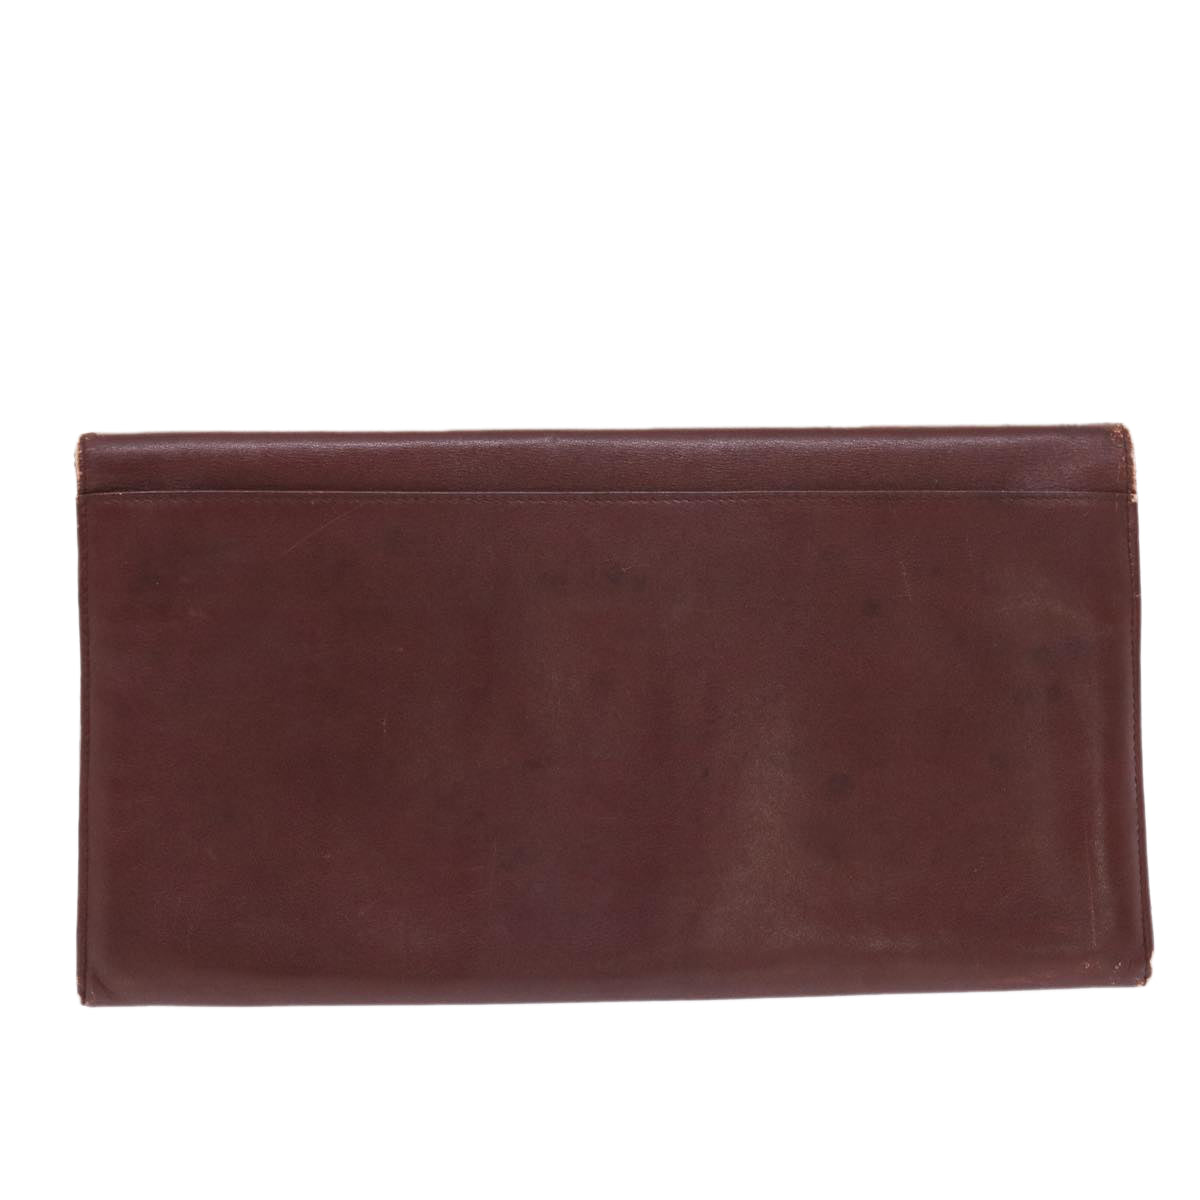 CARTIER Clutch Bag Leather Wine Red Auth 50447